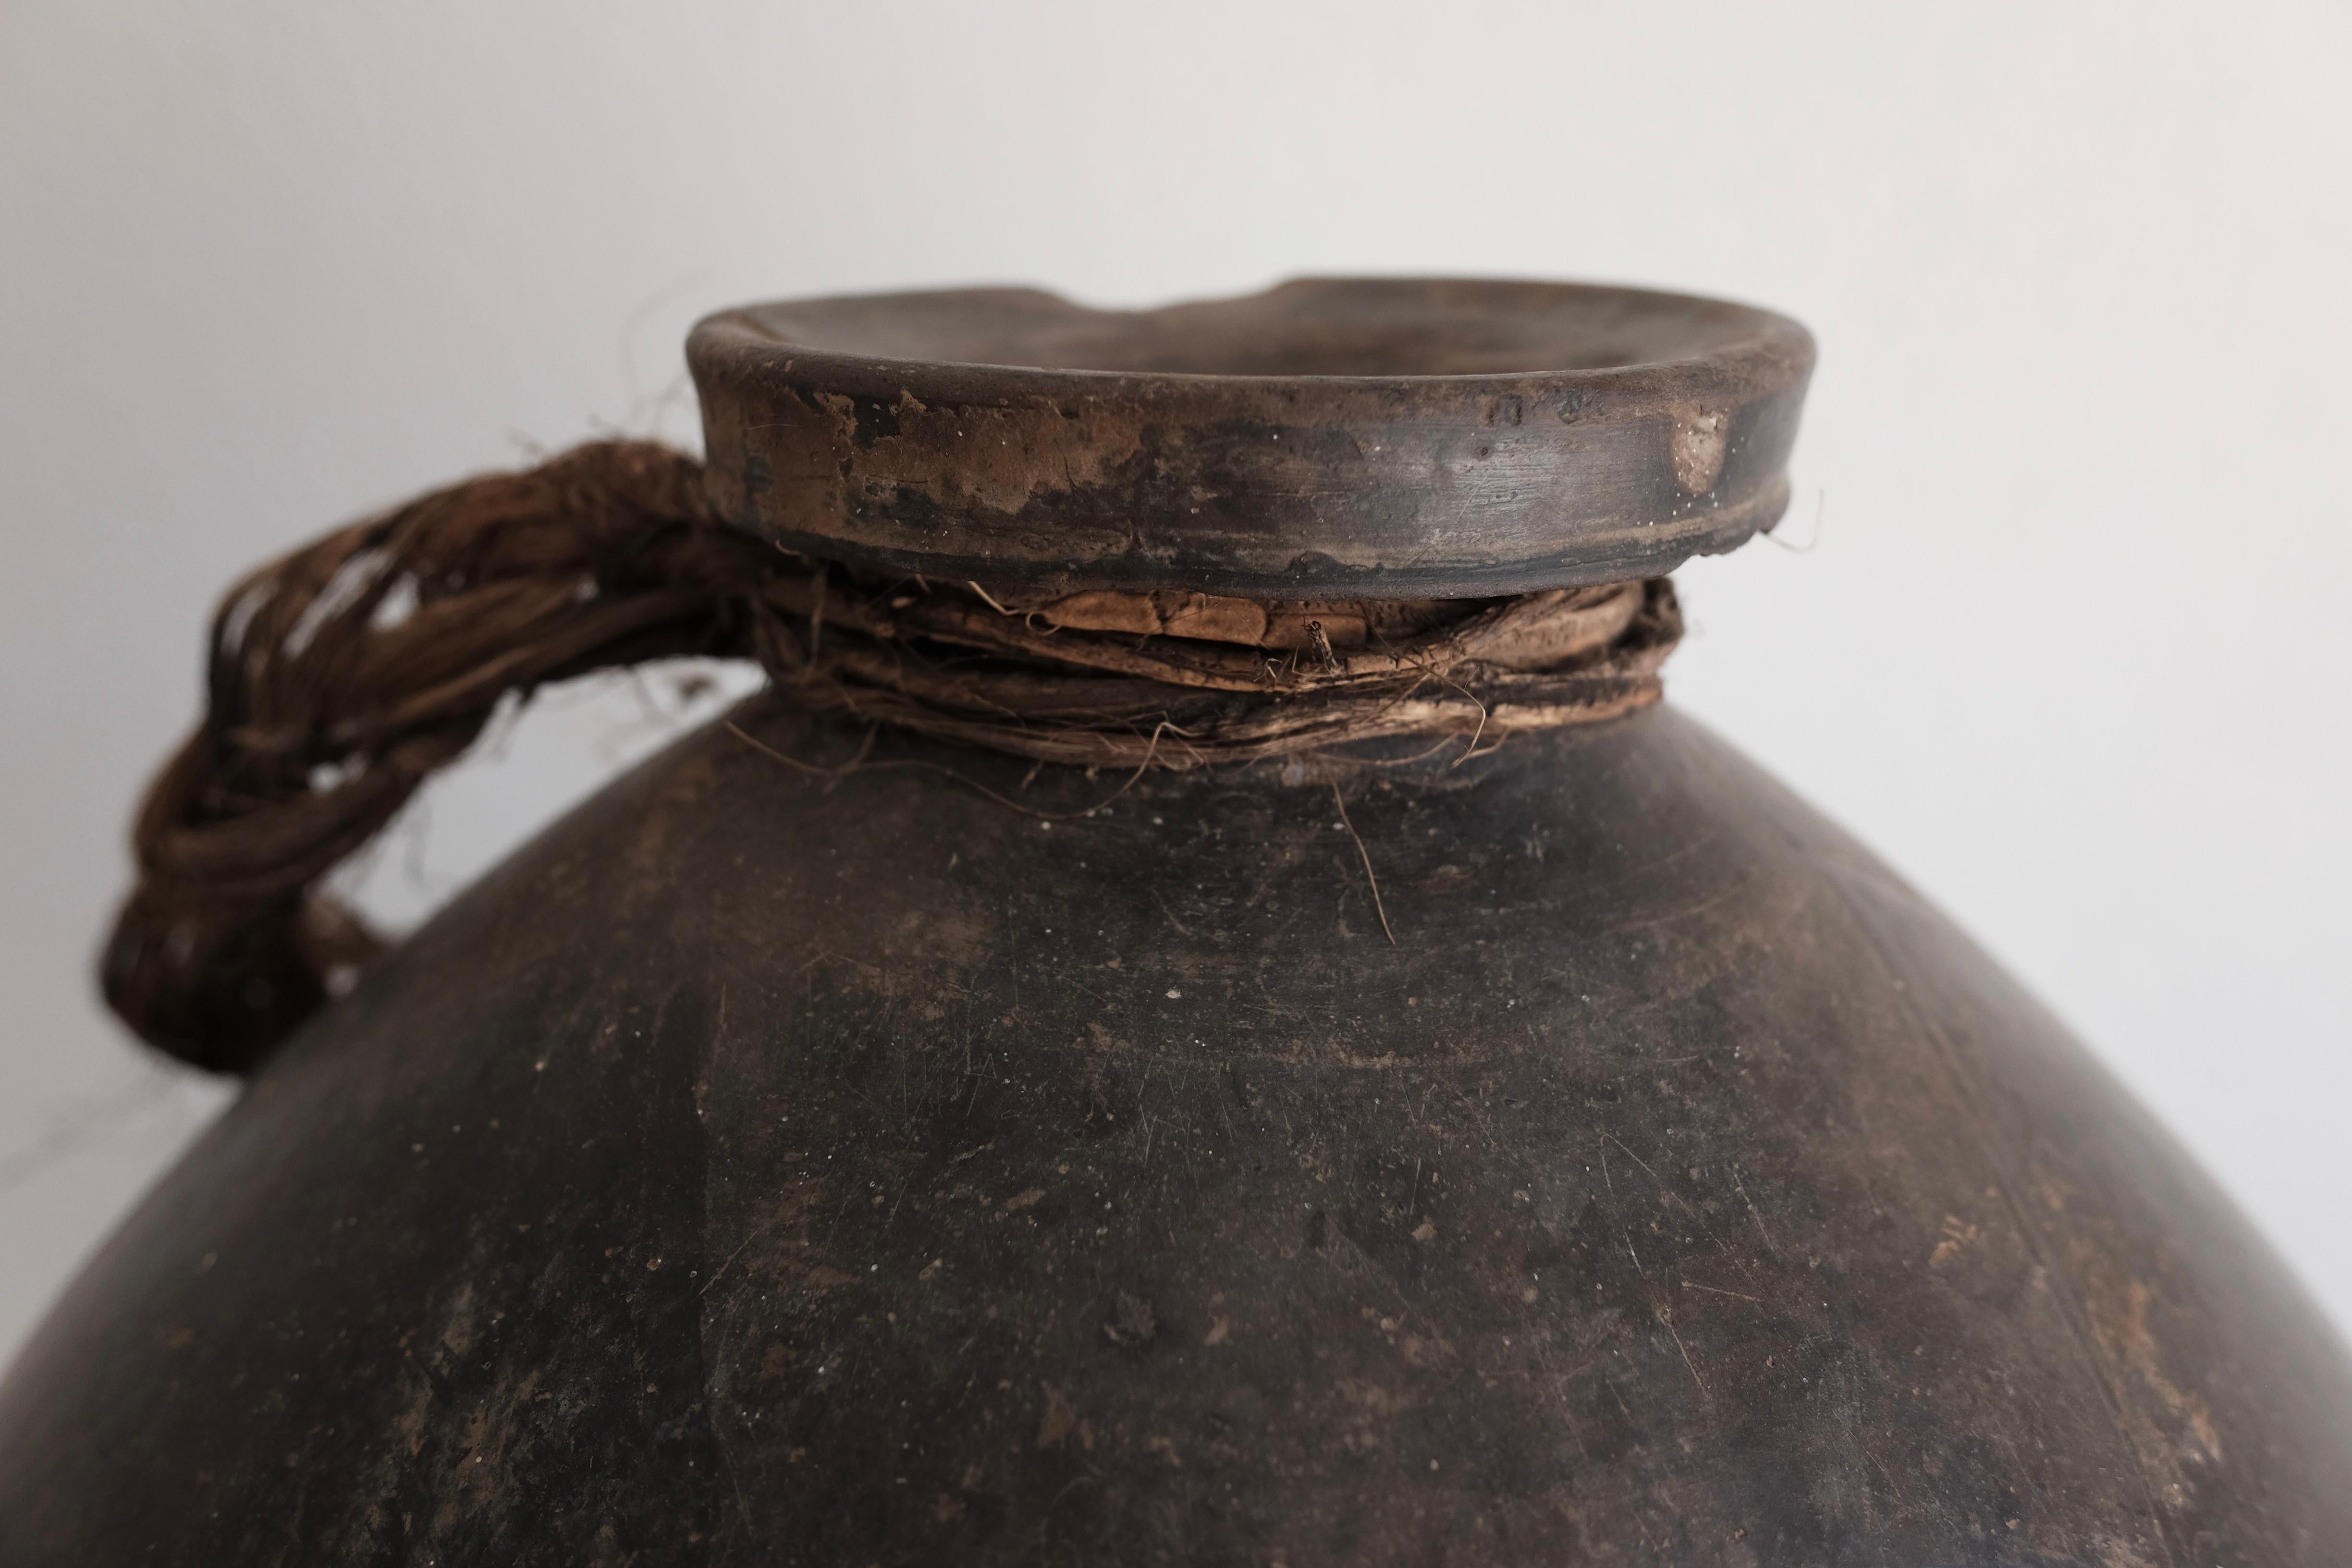 Ceramic mezcal pot from San Bartolo Coyotepec, Oaxaca, Mexico. Used to transport mezcal or pulque by way of donkey from harvest villages. Its egg-shape ensures the highest strength possible. Black clay is only sourced from San Bartolo. The art form